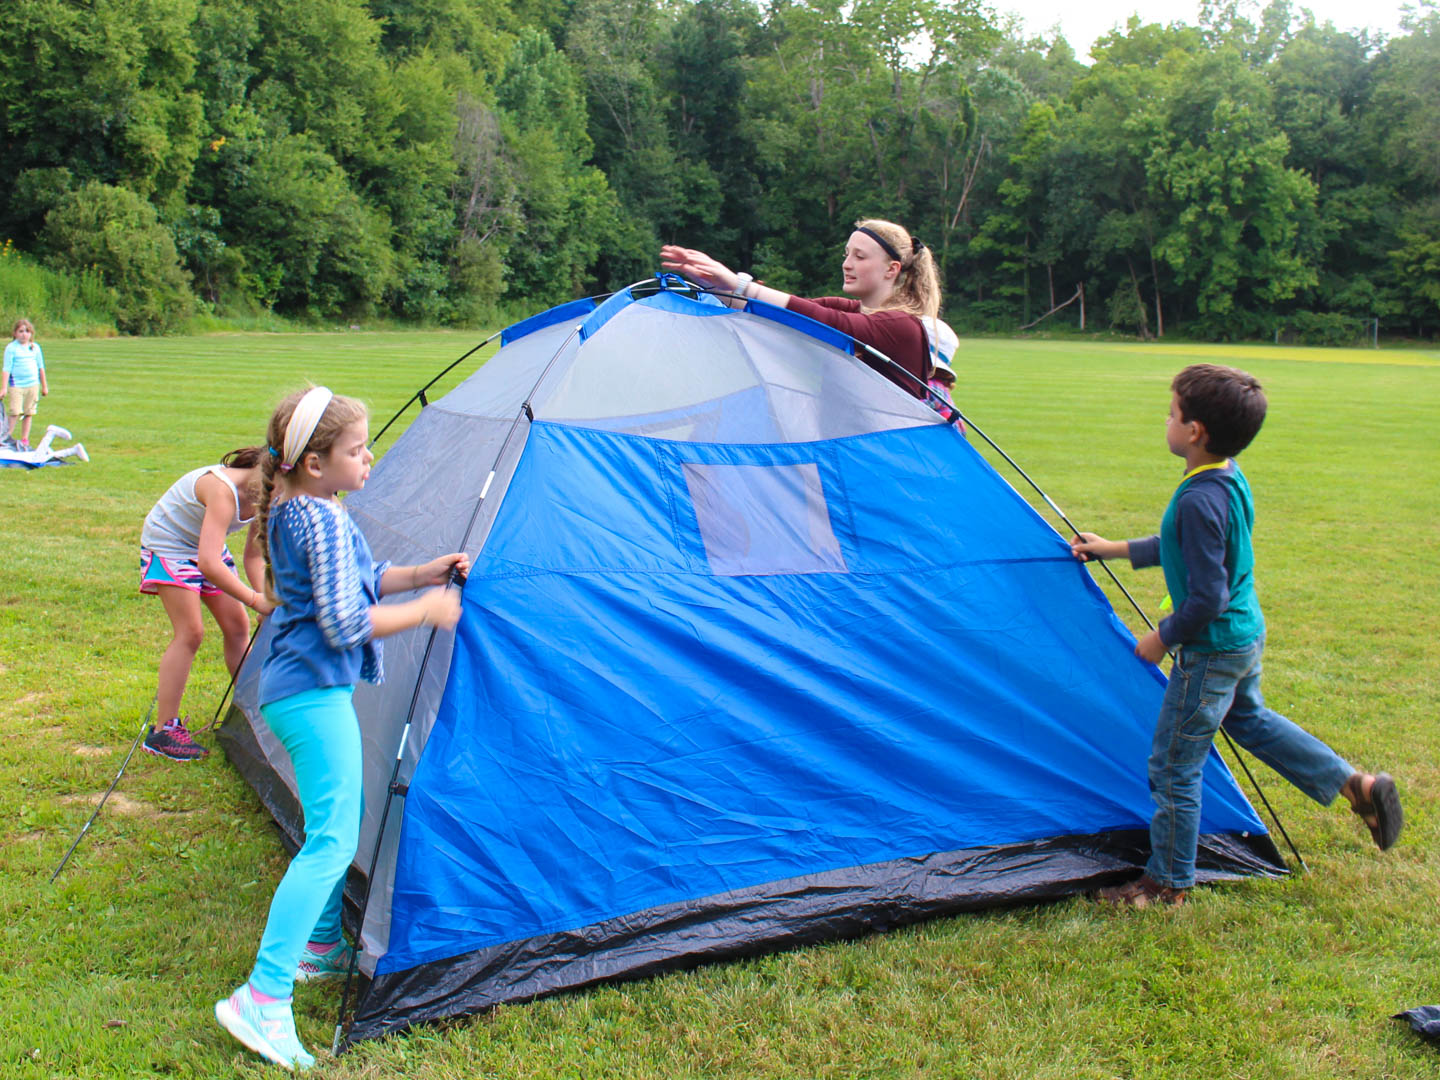 Campers putting up a tent